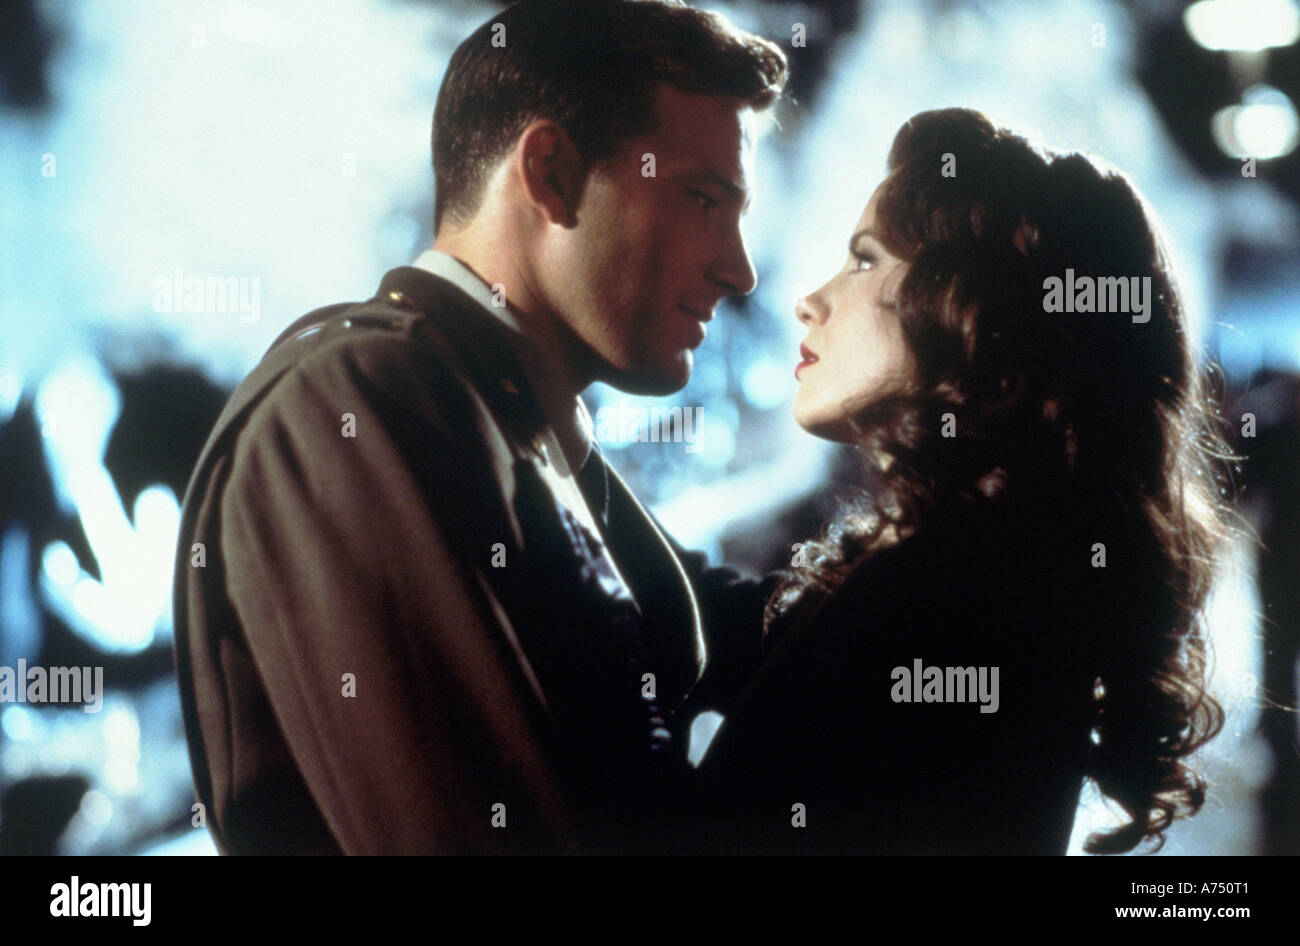 PEARL HARBOUR 2001 Buena Vista film with Ben Affleck and Kate Beckinsale Stock Photo